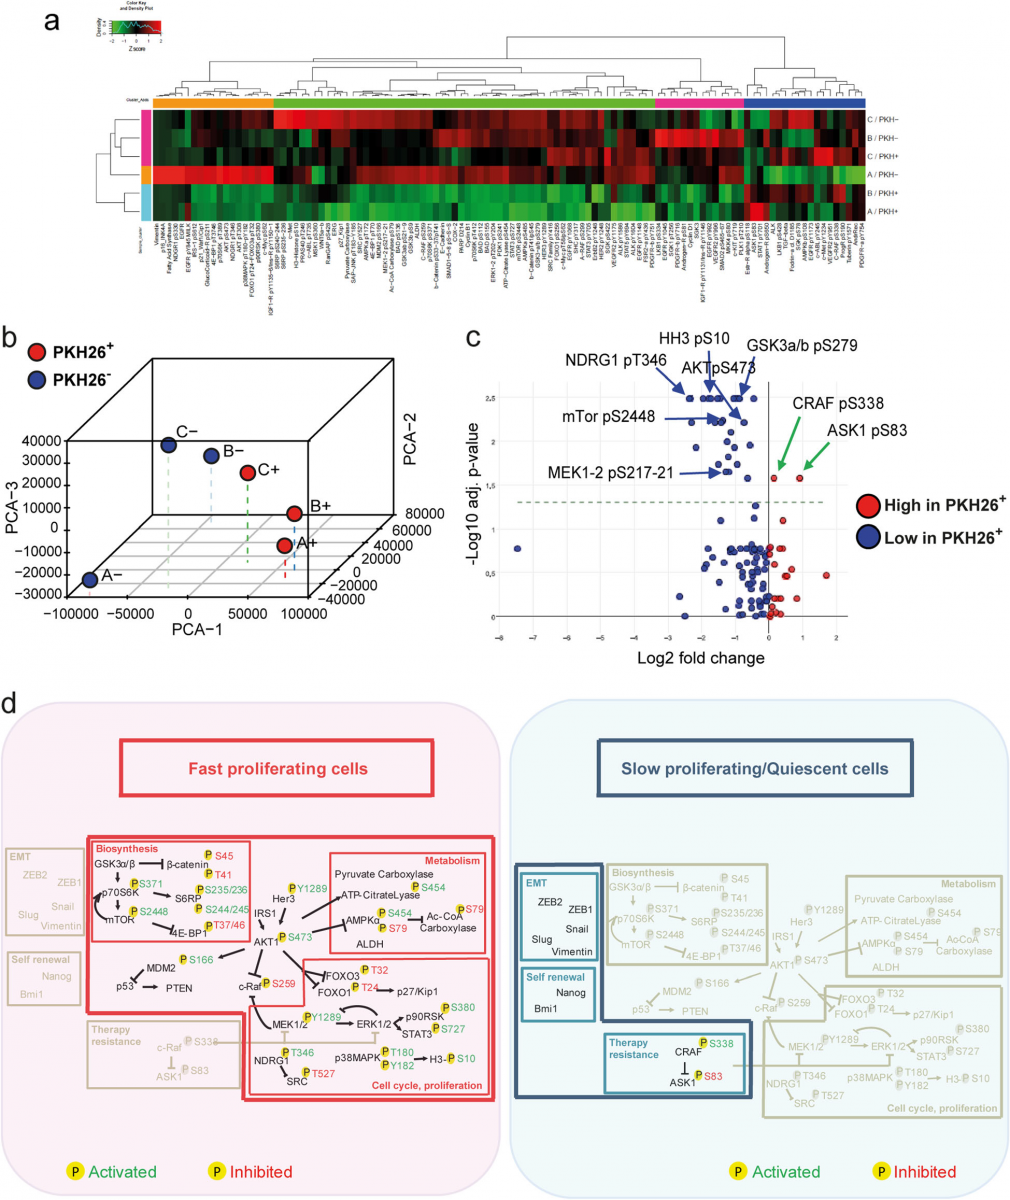 Fig. 2 Reverse-phase proteomic analysis of quiescent/slow cycling xenograft cells.